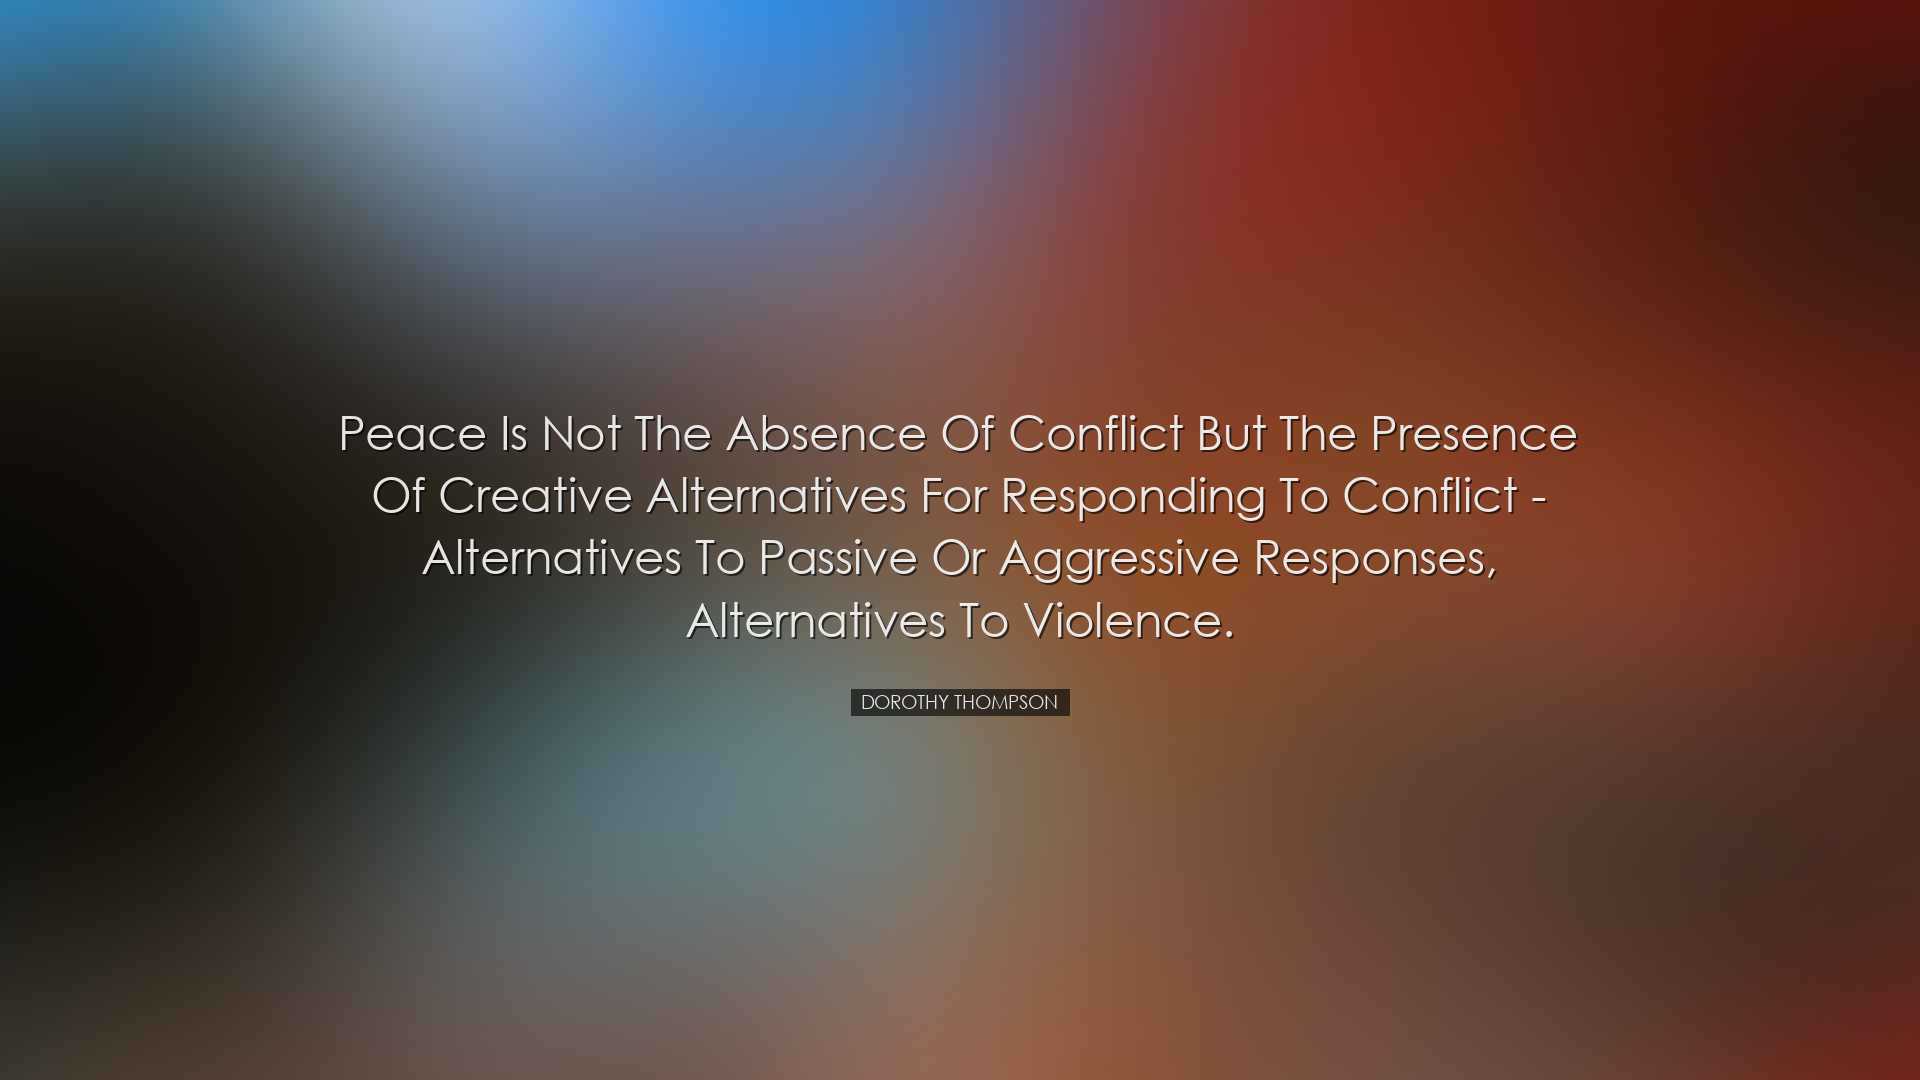 Peace is not the absence of conflict but the presence of creative